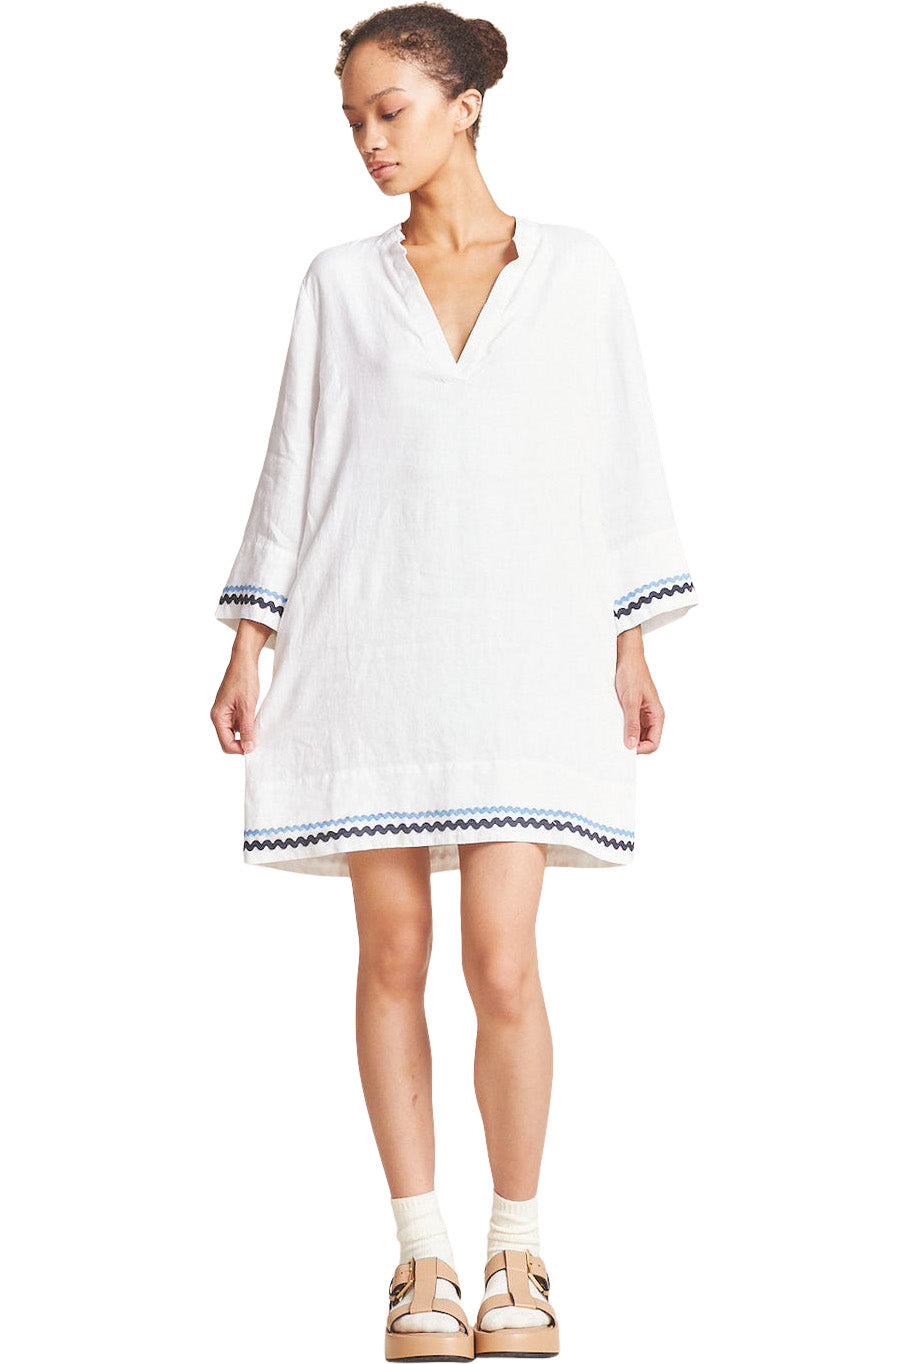 Trovata Birds of Paradis Lucca Shift Dress in White with Ric Rac